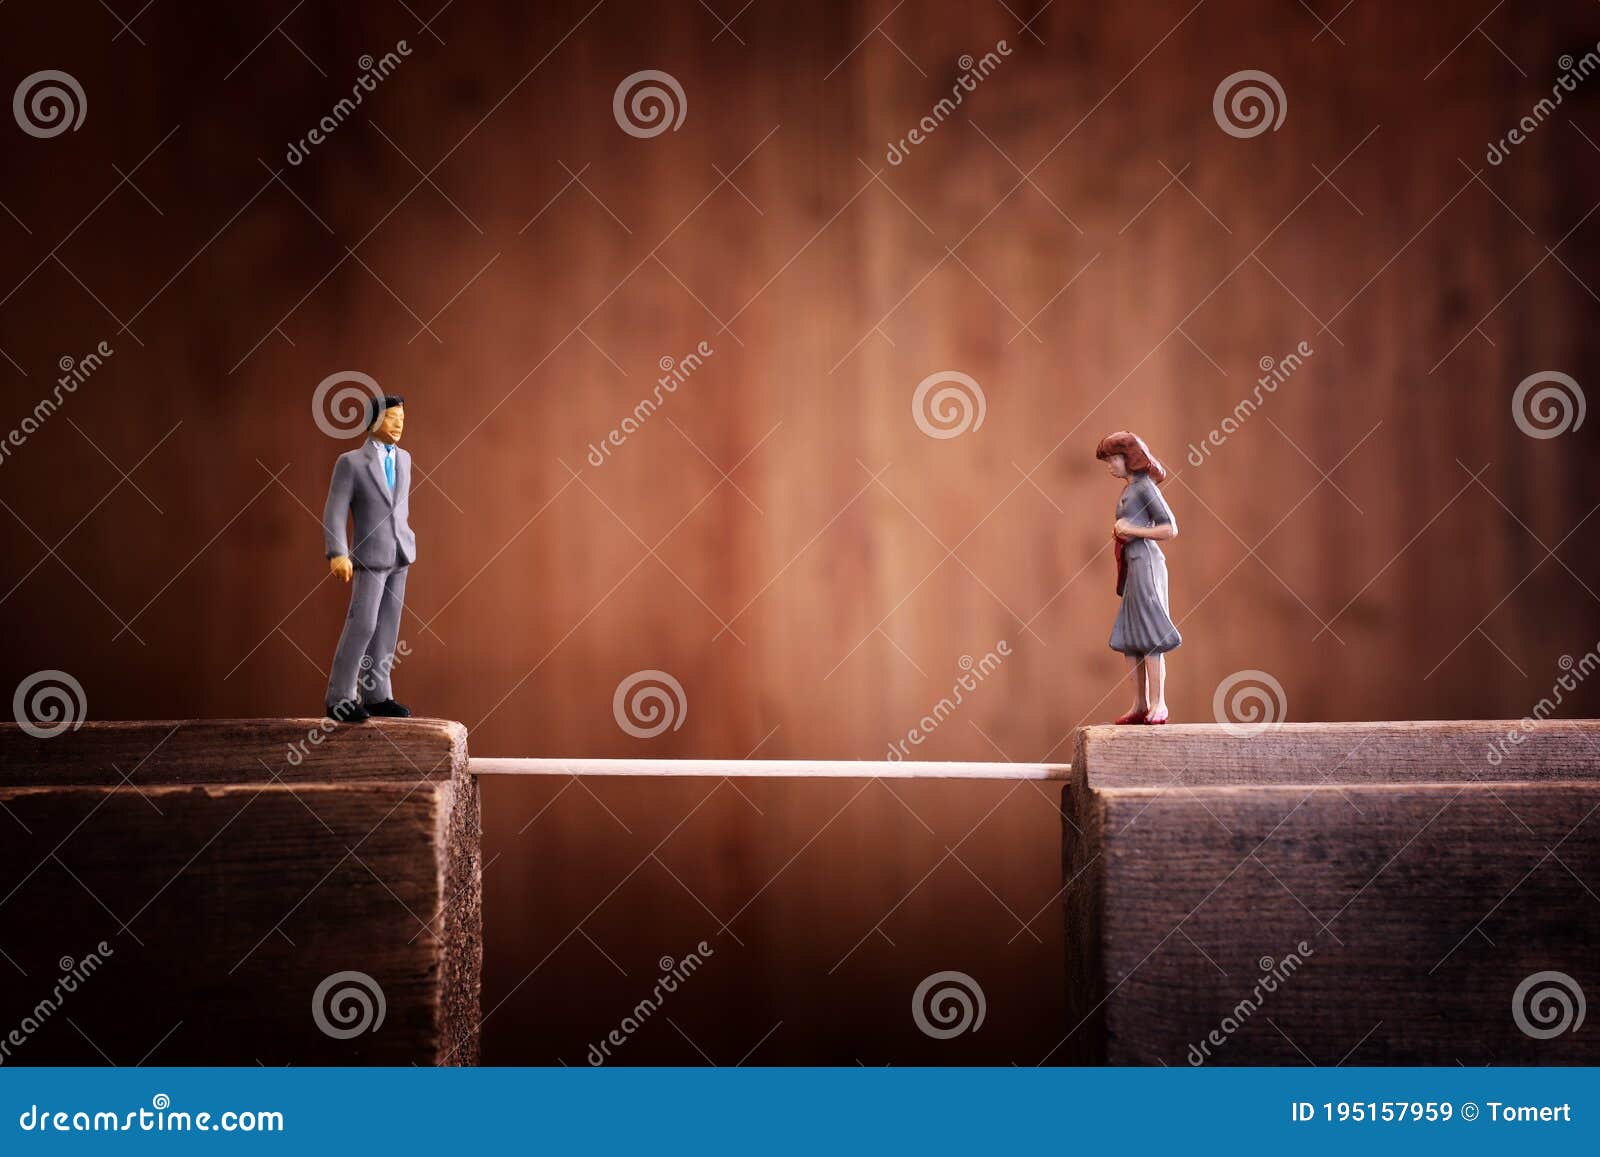 concept image of bridging the gap. a man has to cross a thin rope to reach his partner who is on the other side